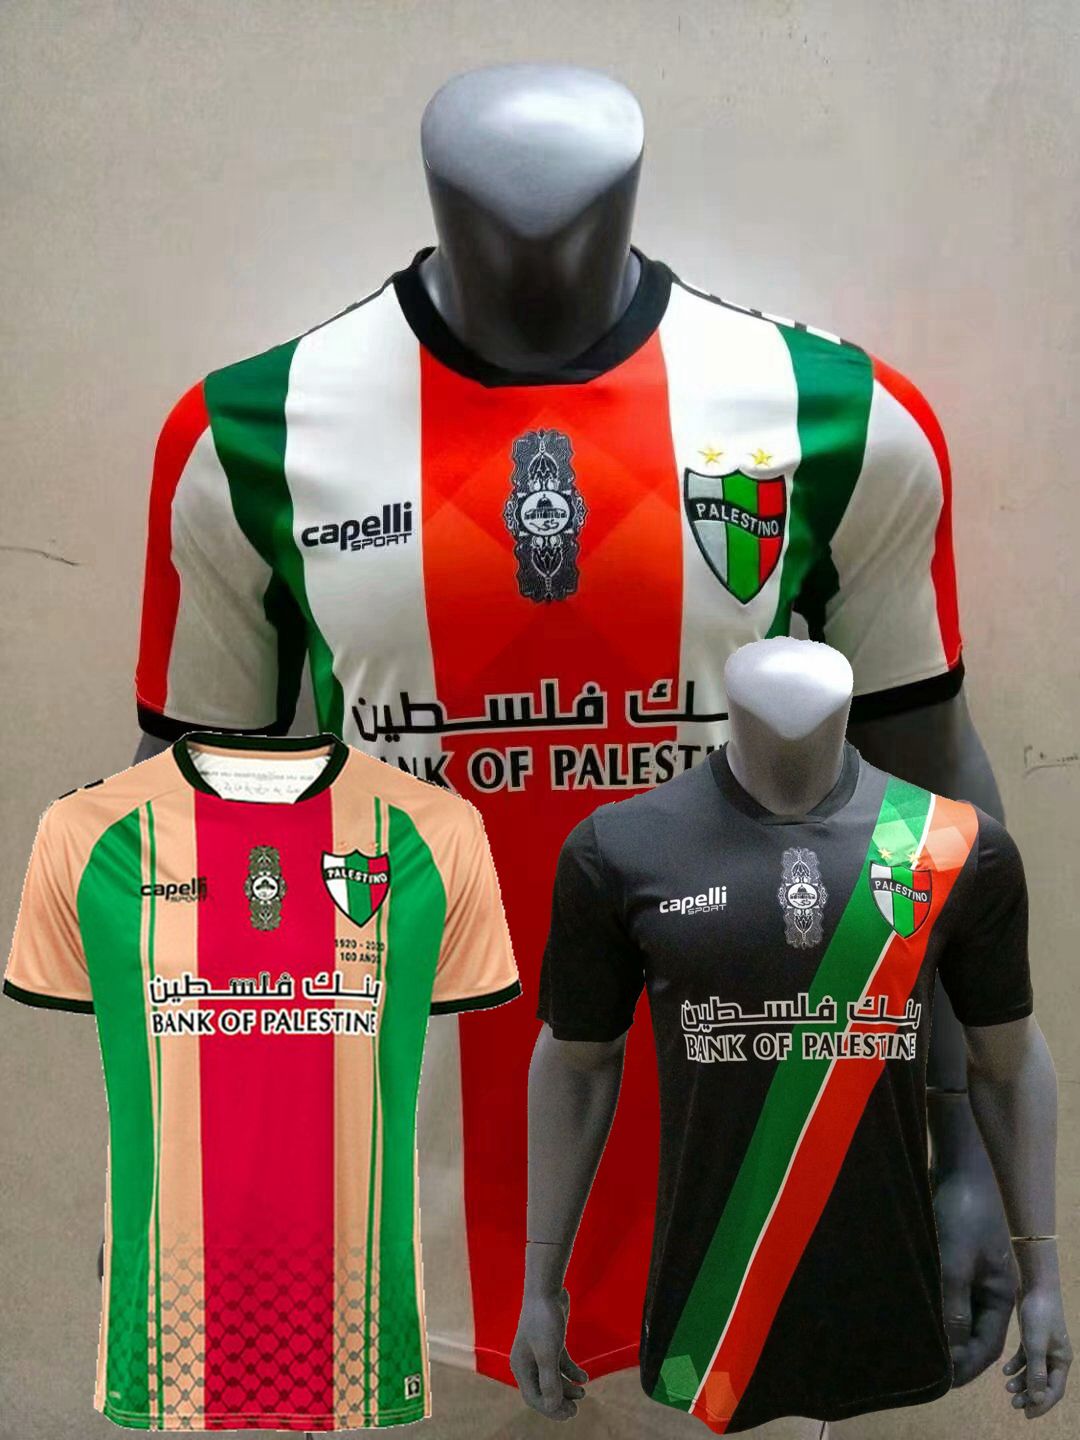 2021 2021 2022 Cd Palestino Soccer Jerseys Chile Cutierrez Campos Rosende Orres Home Away 3rd 20 21 22 Football Shirt From Xx233792844 13 56 Dhgate Com